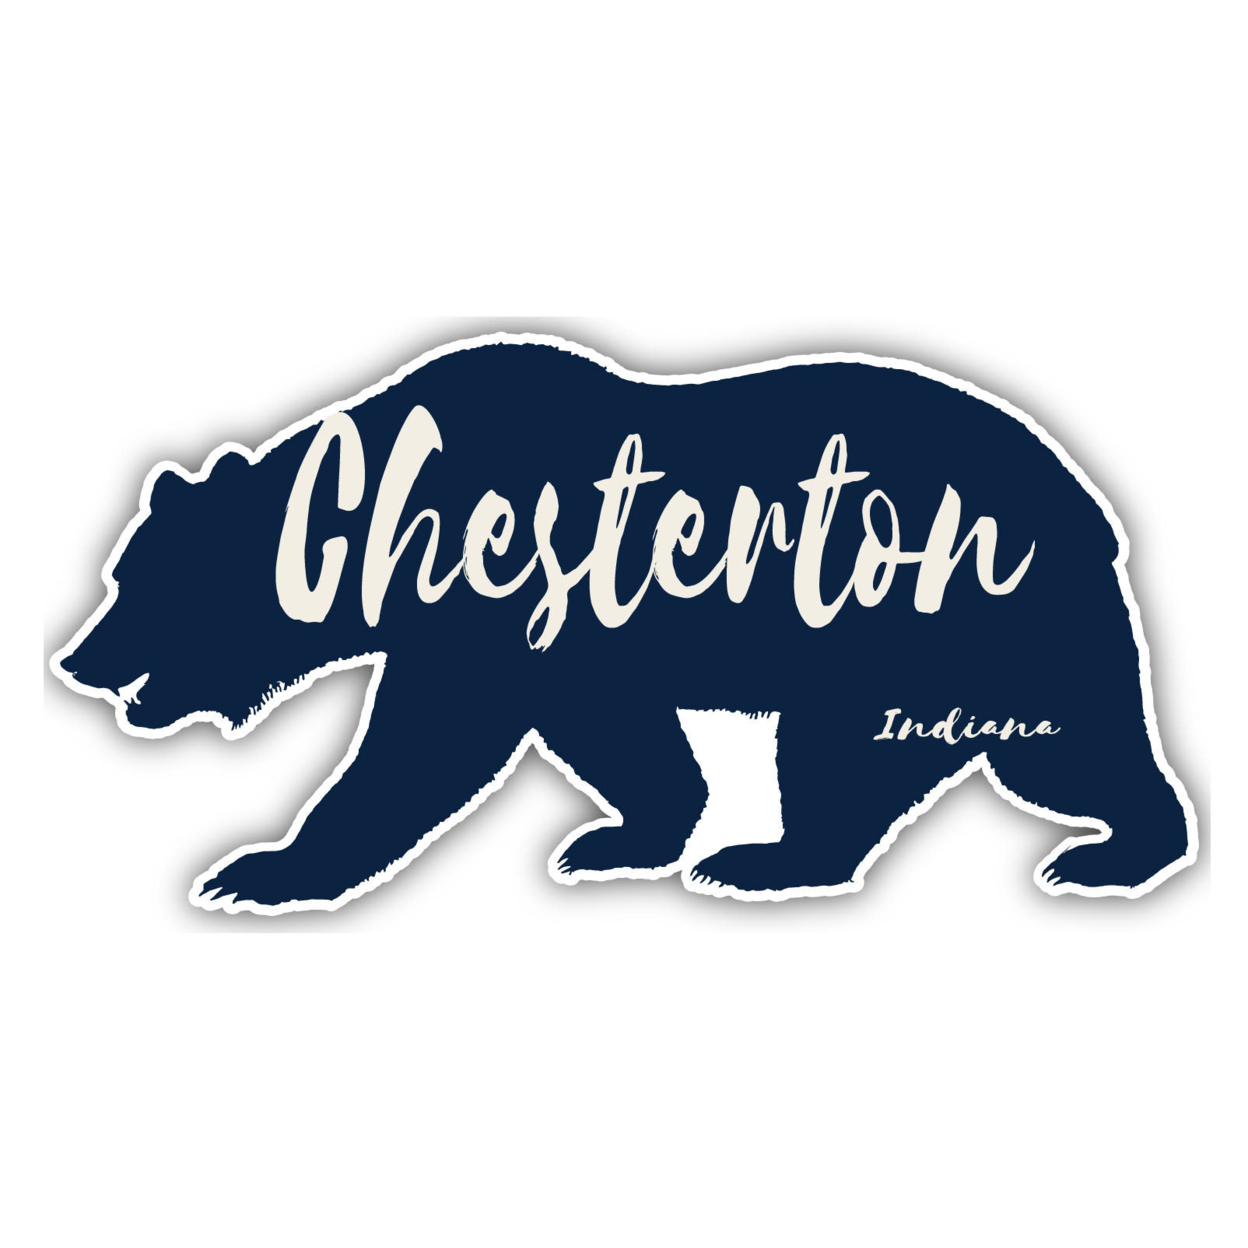 Chesterton Indiana Souvenir Decorative Stickers (Choose Theme And Size) - Single Unit, 10-Inch, Adventures Awaits